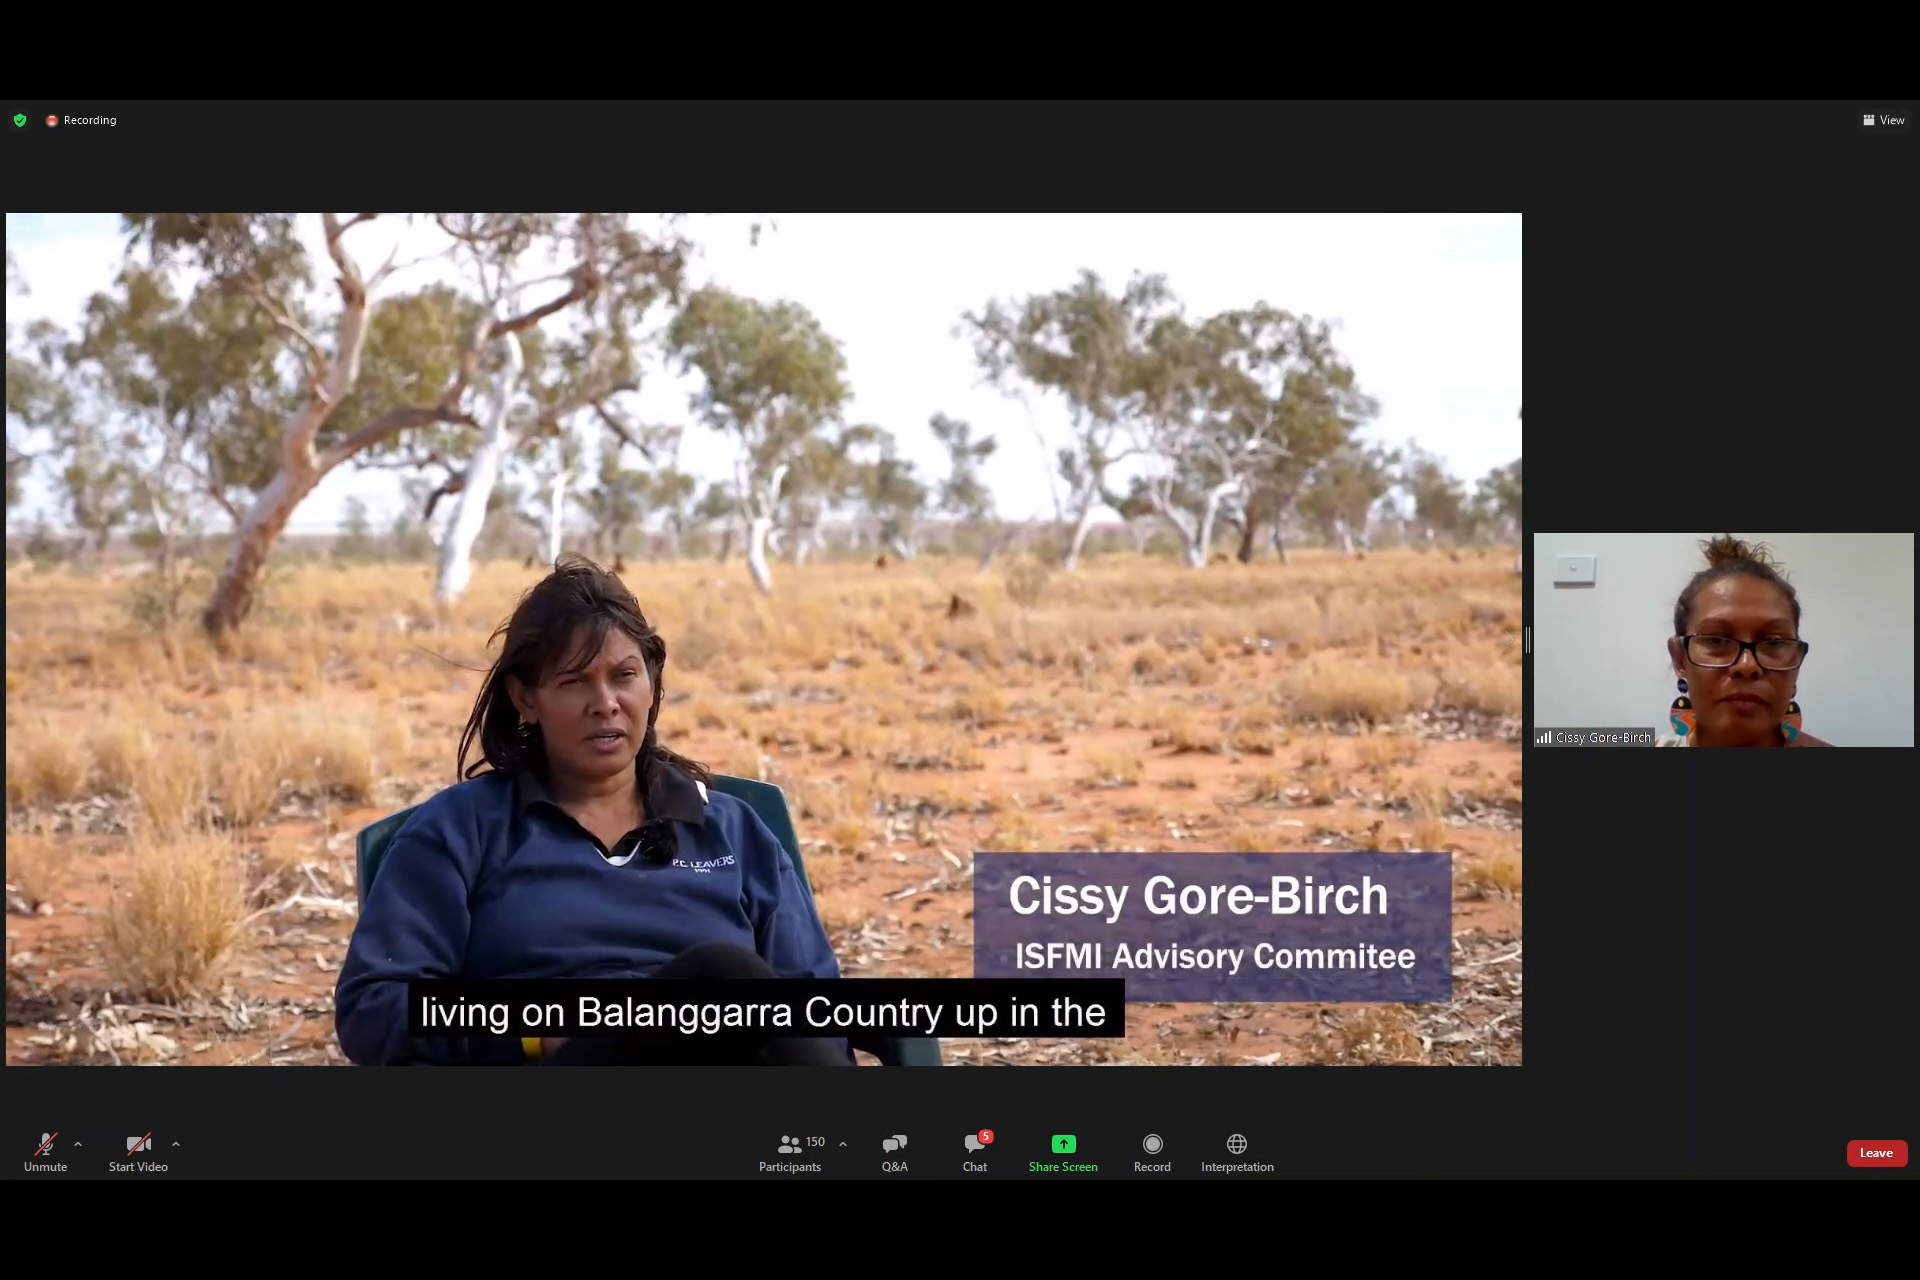 Cissy Gore, Traditional Owner from Western Australia